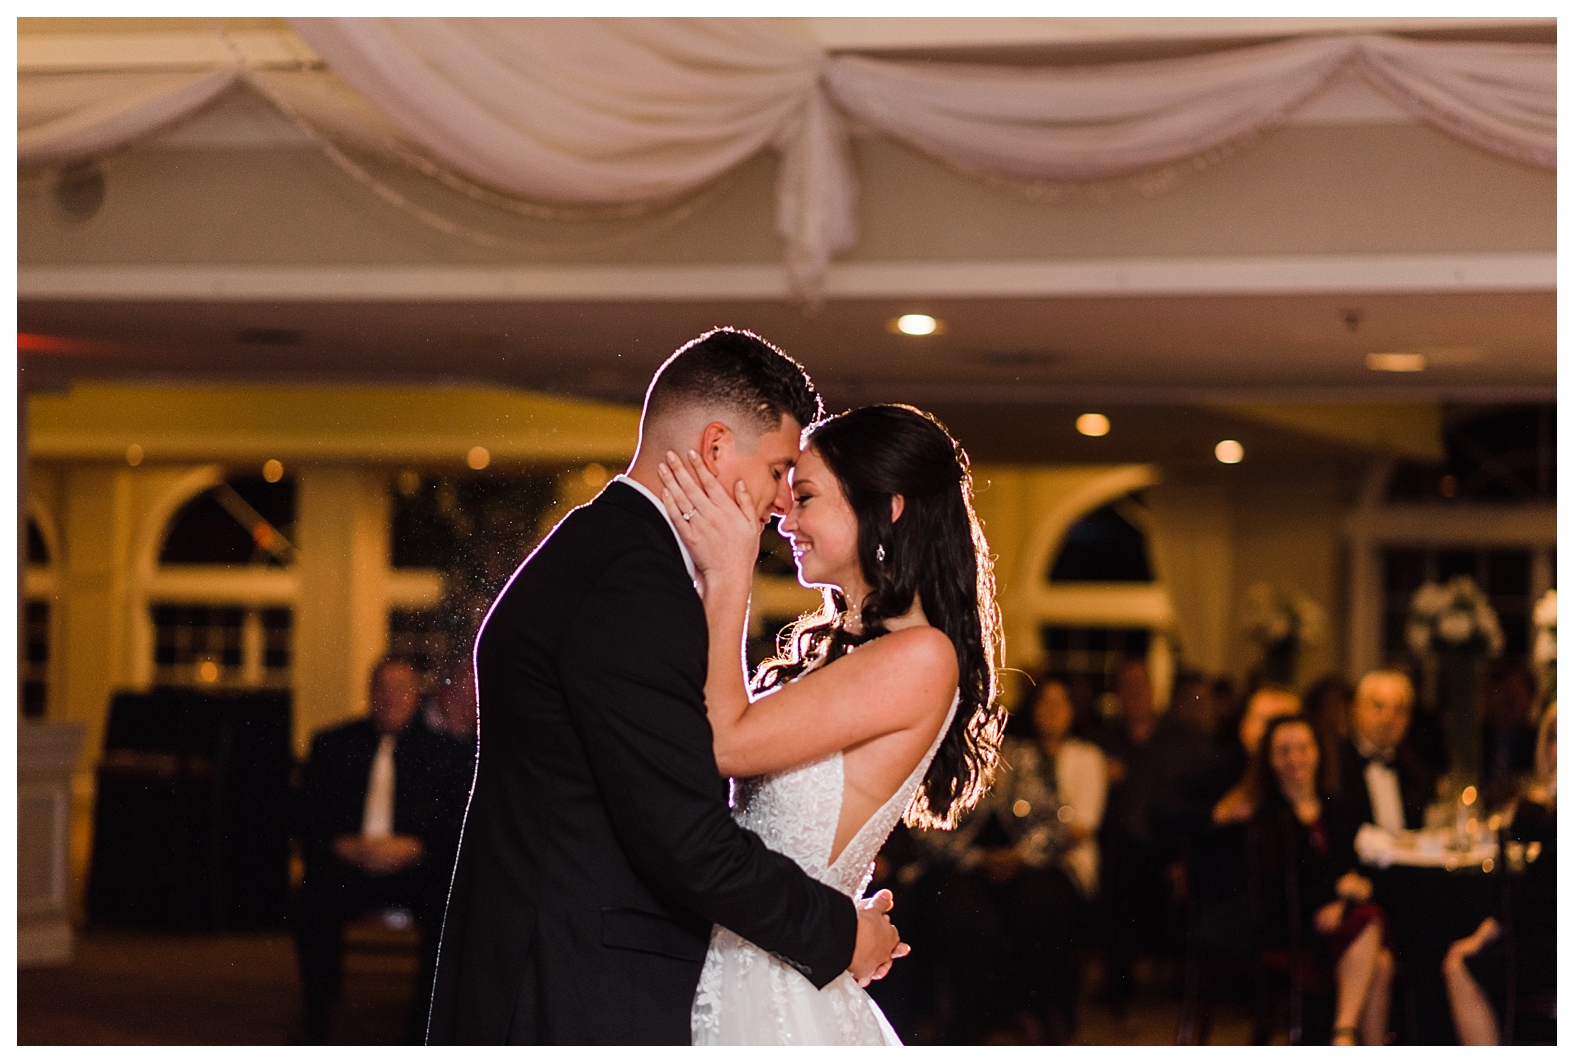 First dance - J Canelas Photography